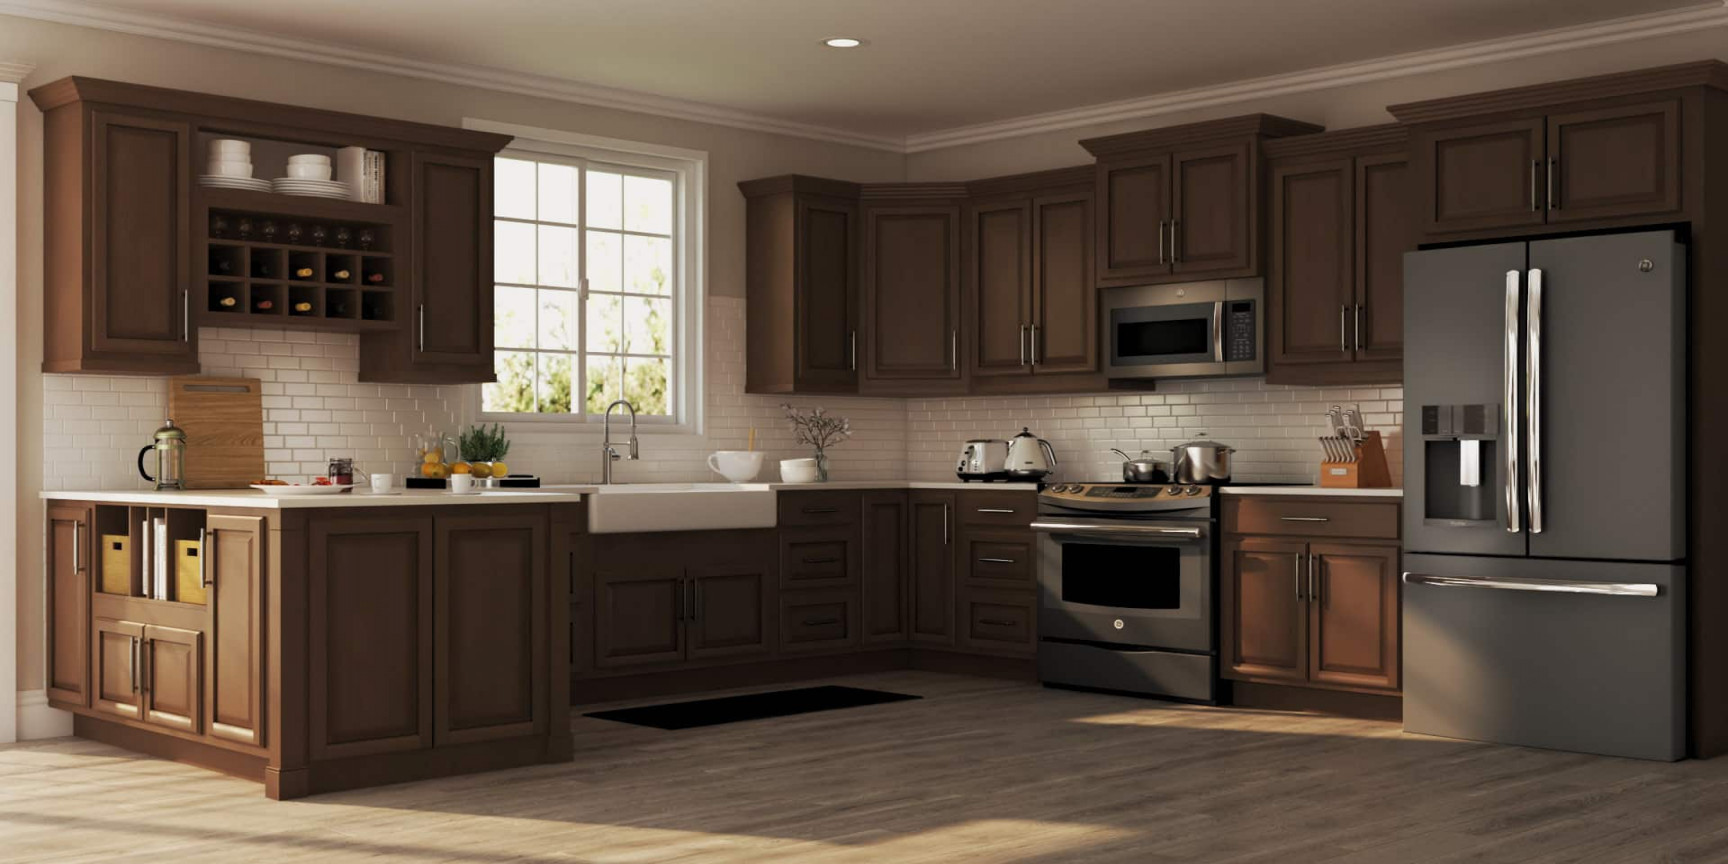 Hampton Base Kitchen Cabinets in Cognac - Kitchen - The Home Depot